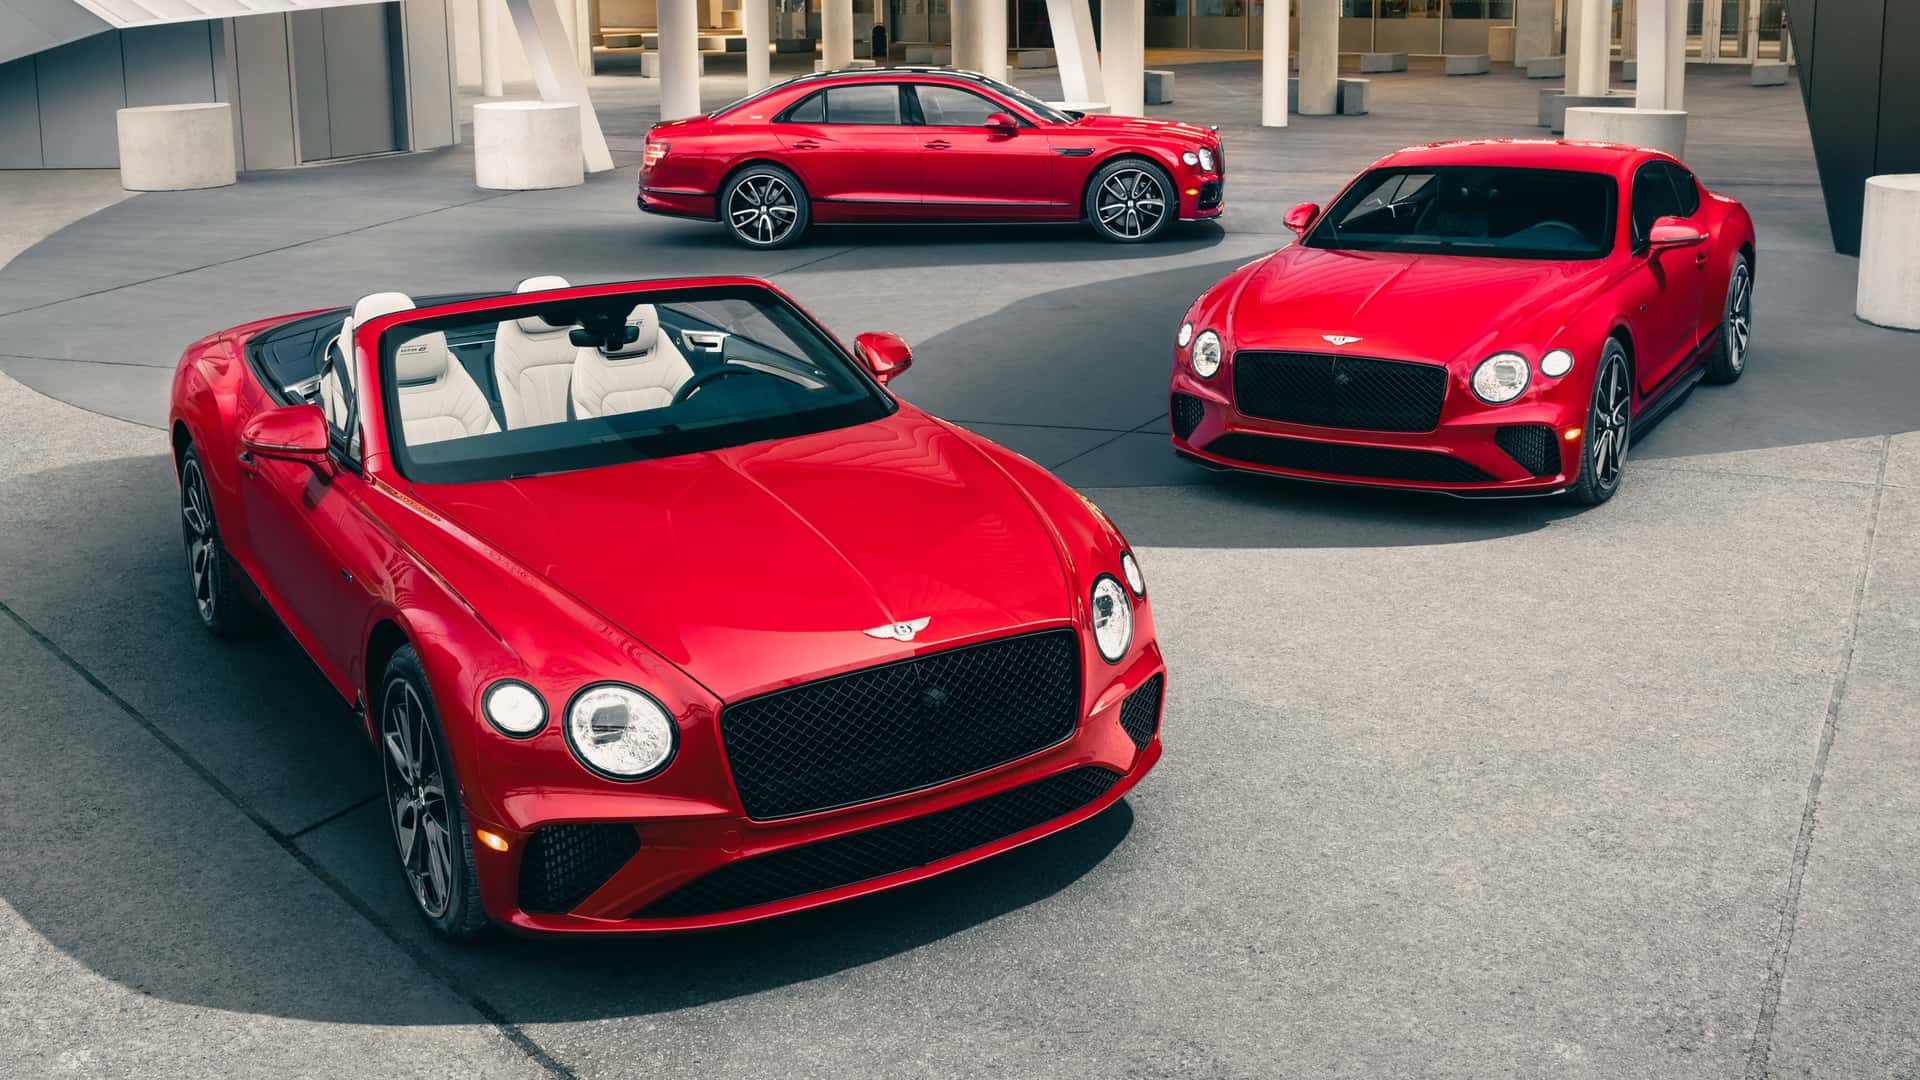 bentley's gas-only v-8 engine is almost dead